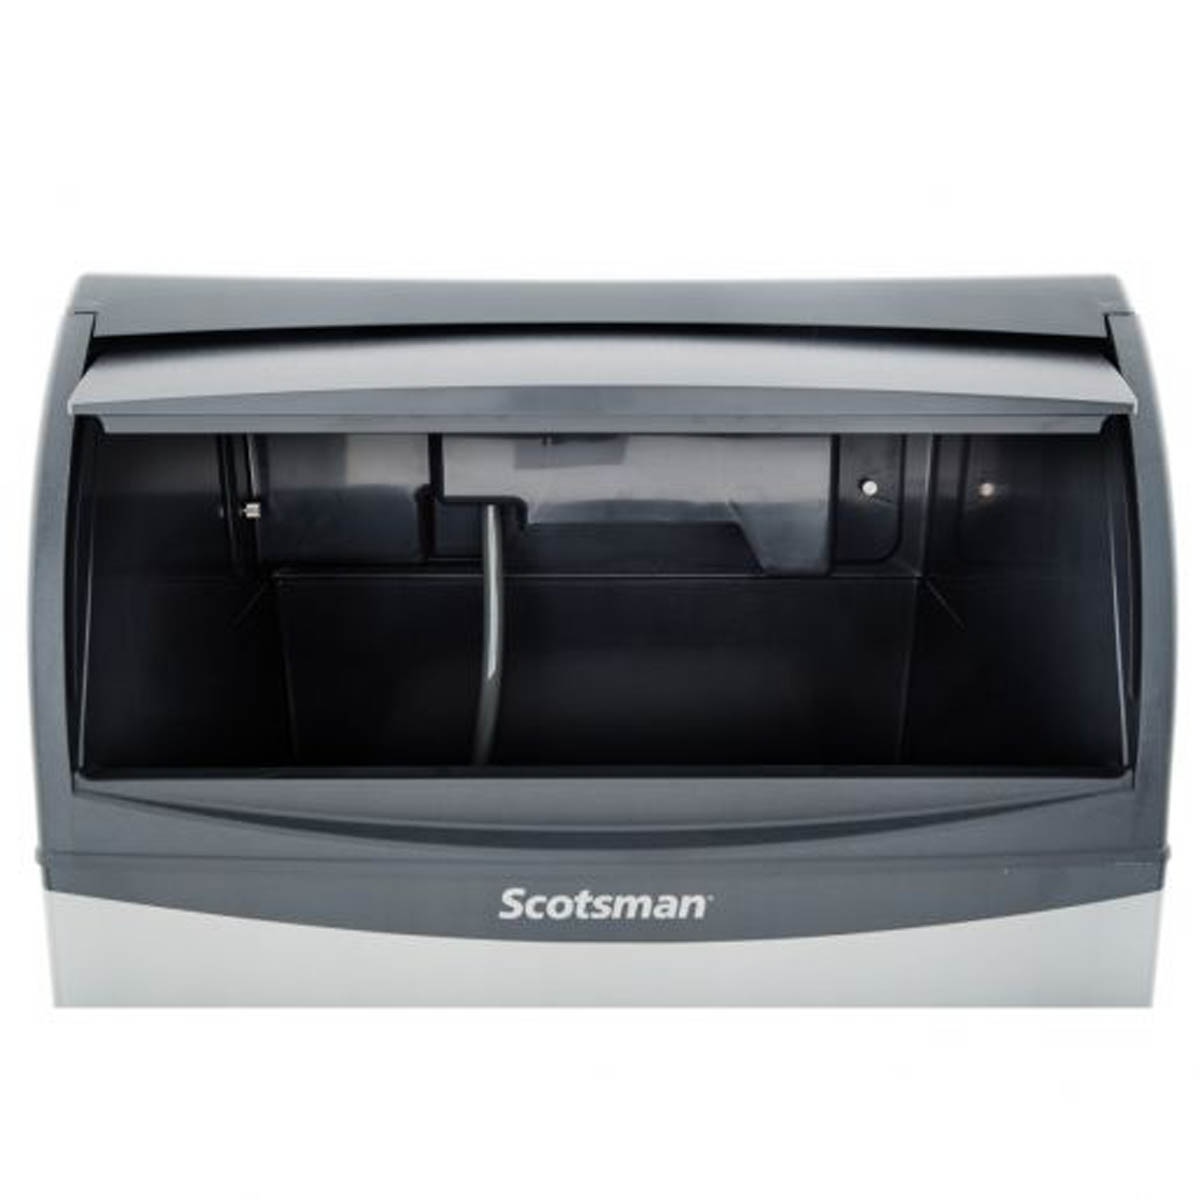 Scotsman UF424A-1 Provides Soft and Slow Melting For Your Service and Displays, Chef's Deal